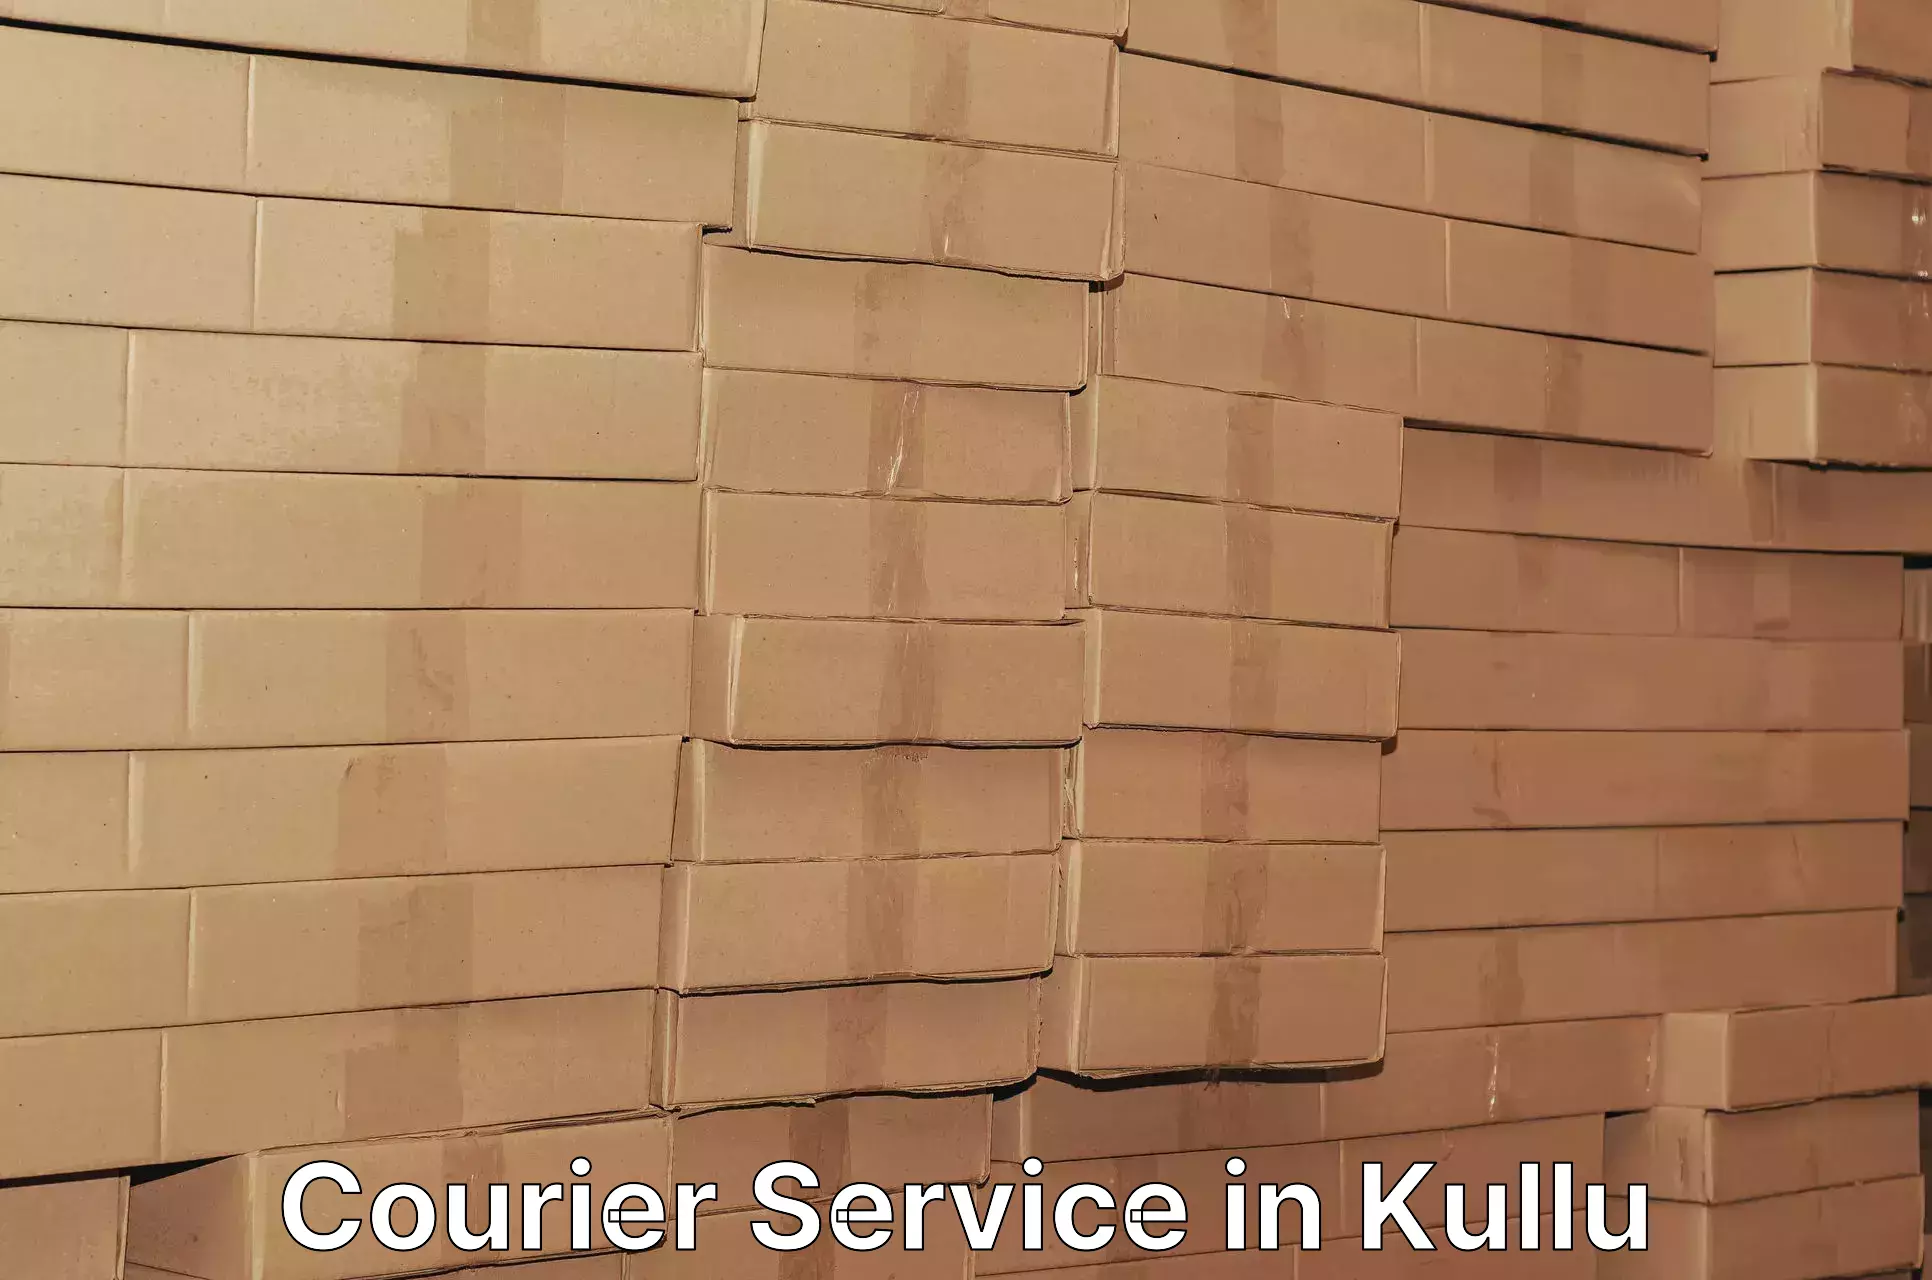 Courier services in Kullu